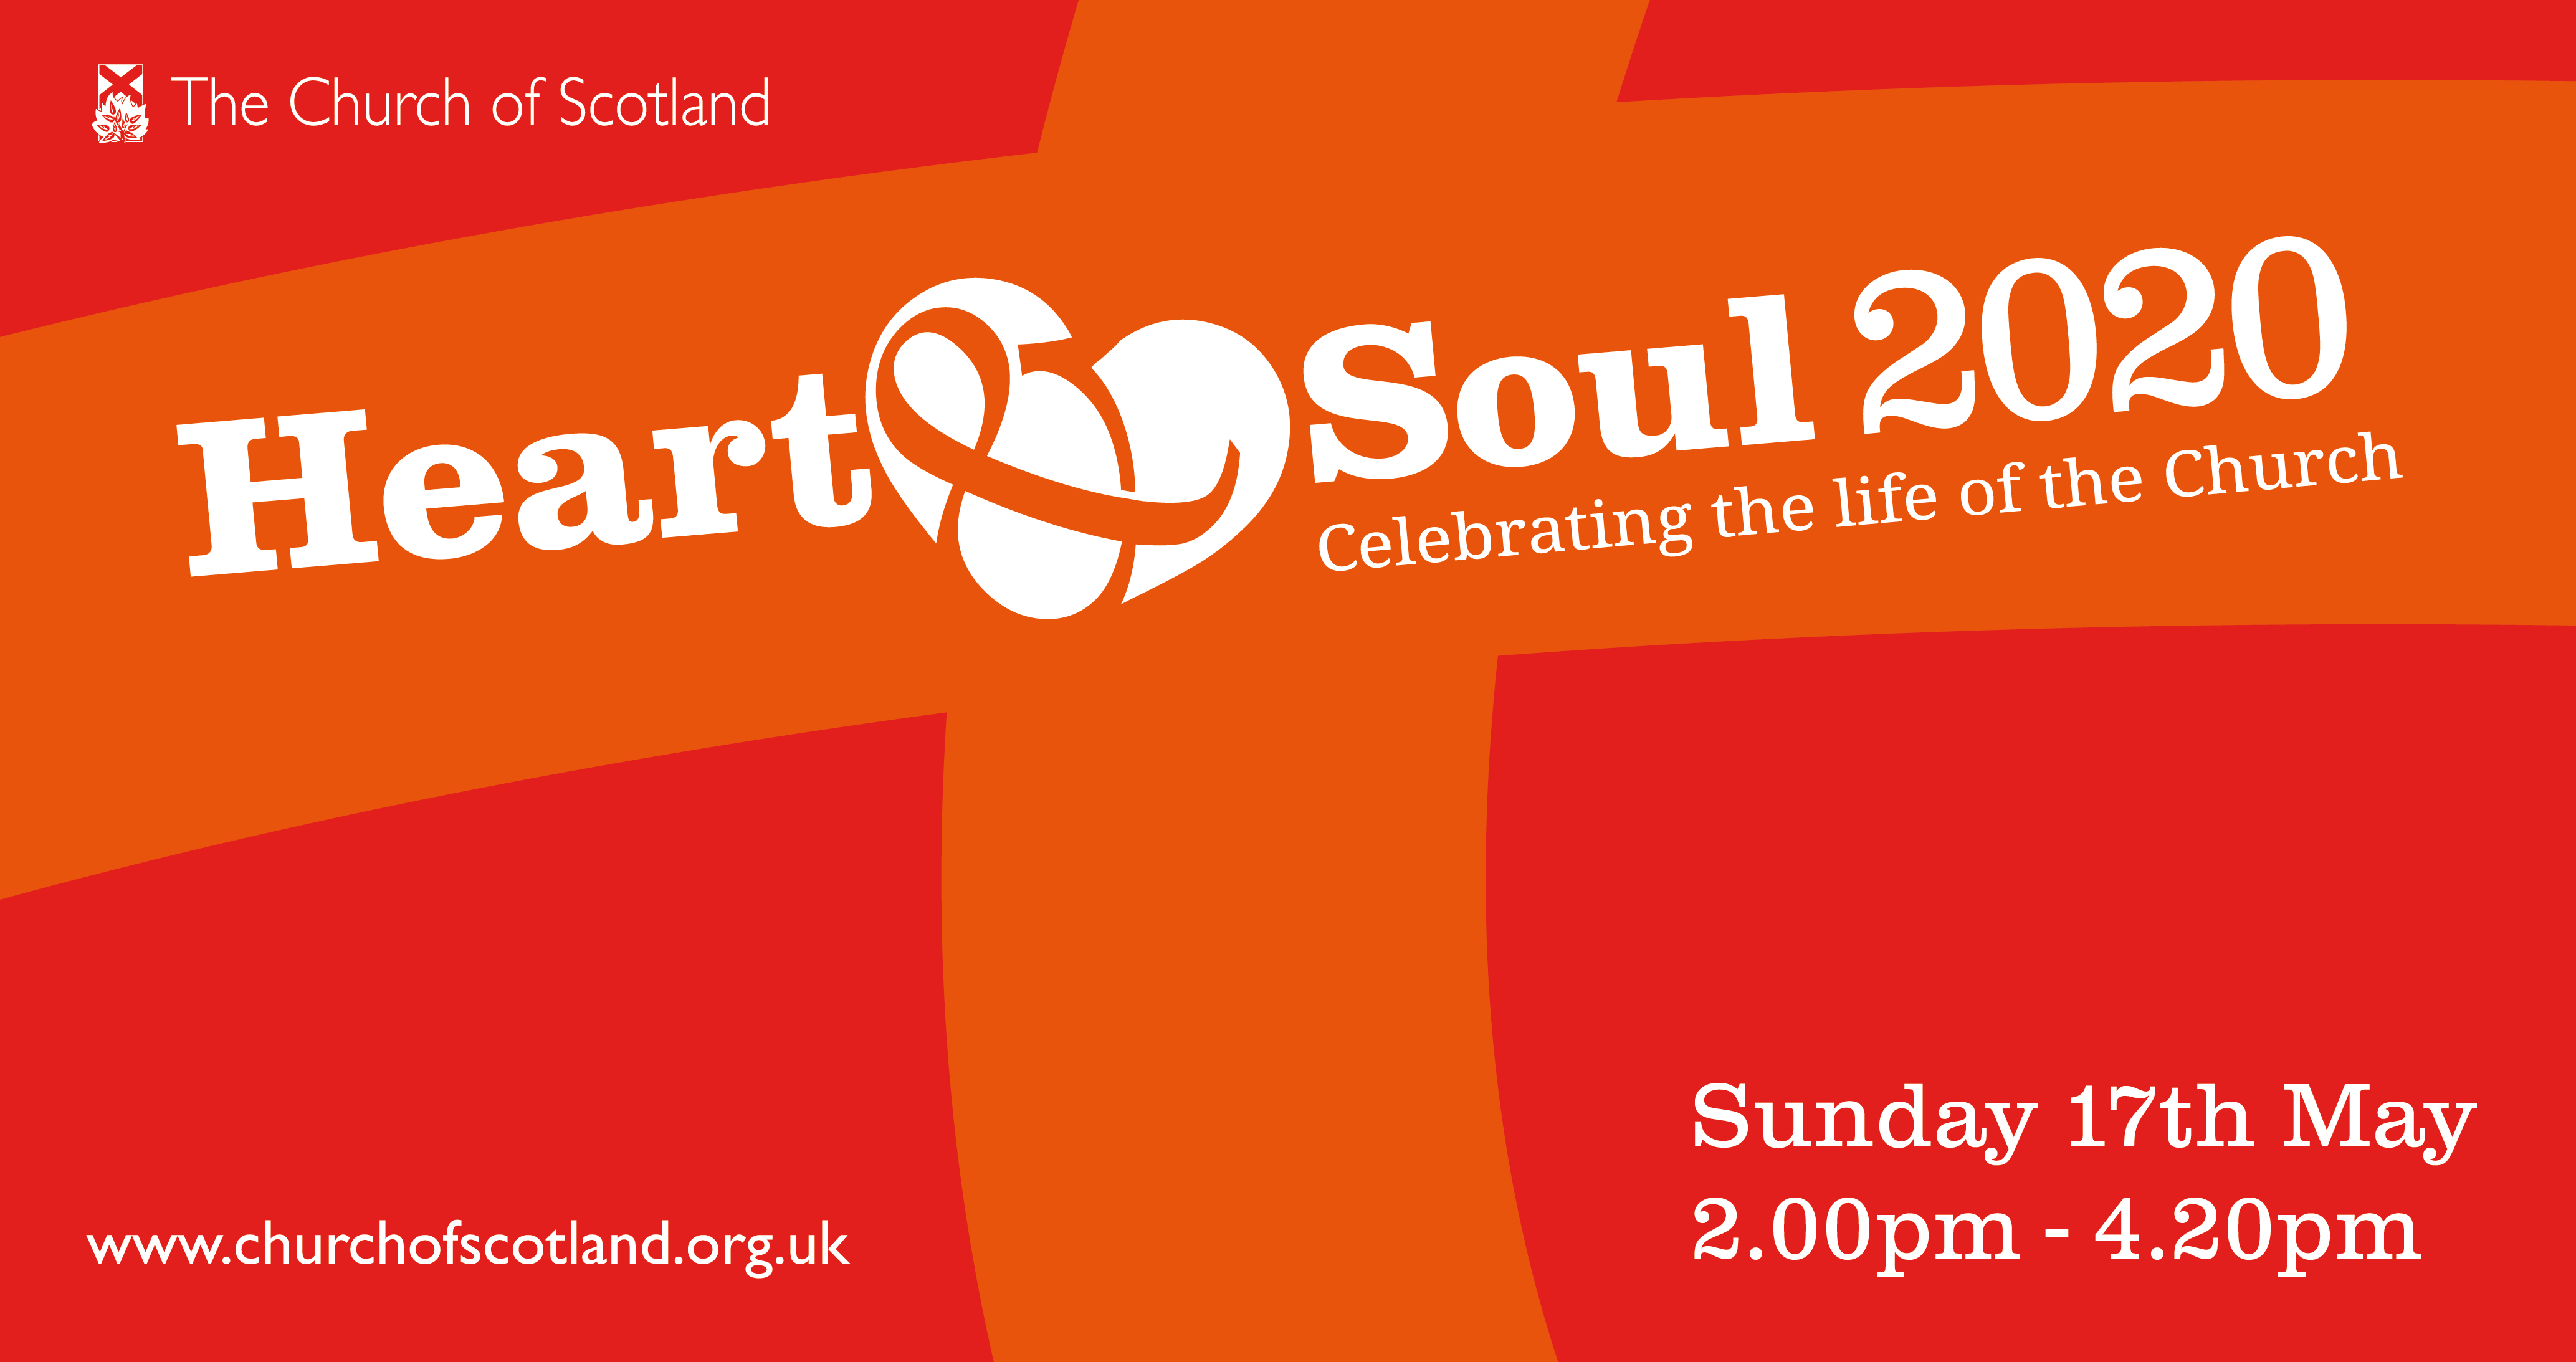 Heart and Soul 2020 - Sunday, 17th May